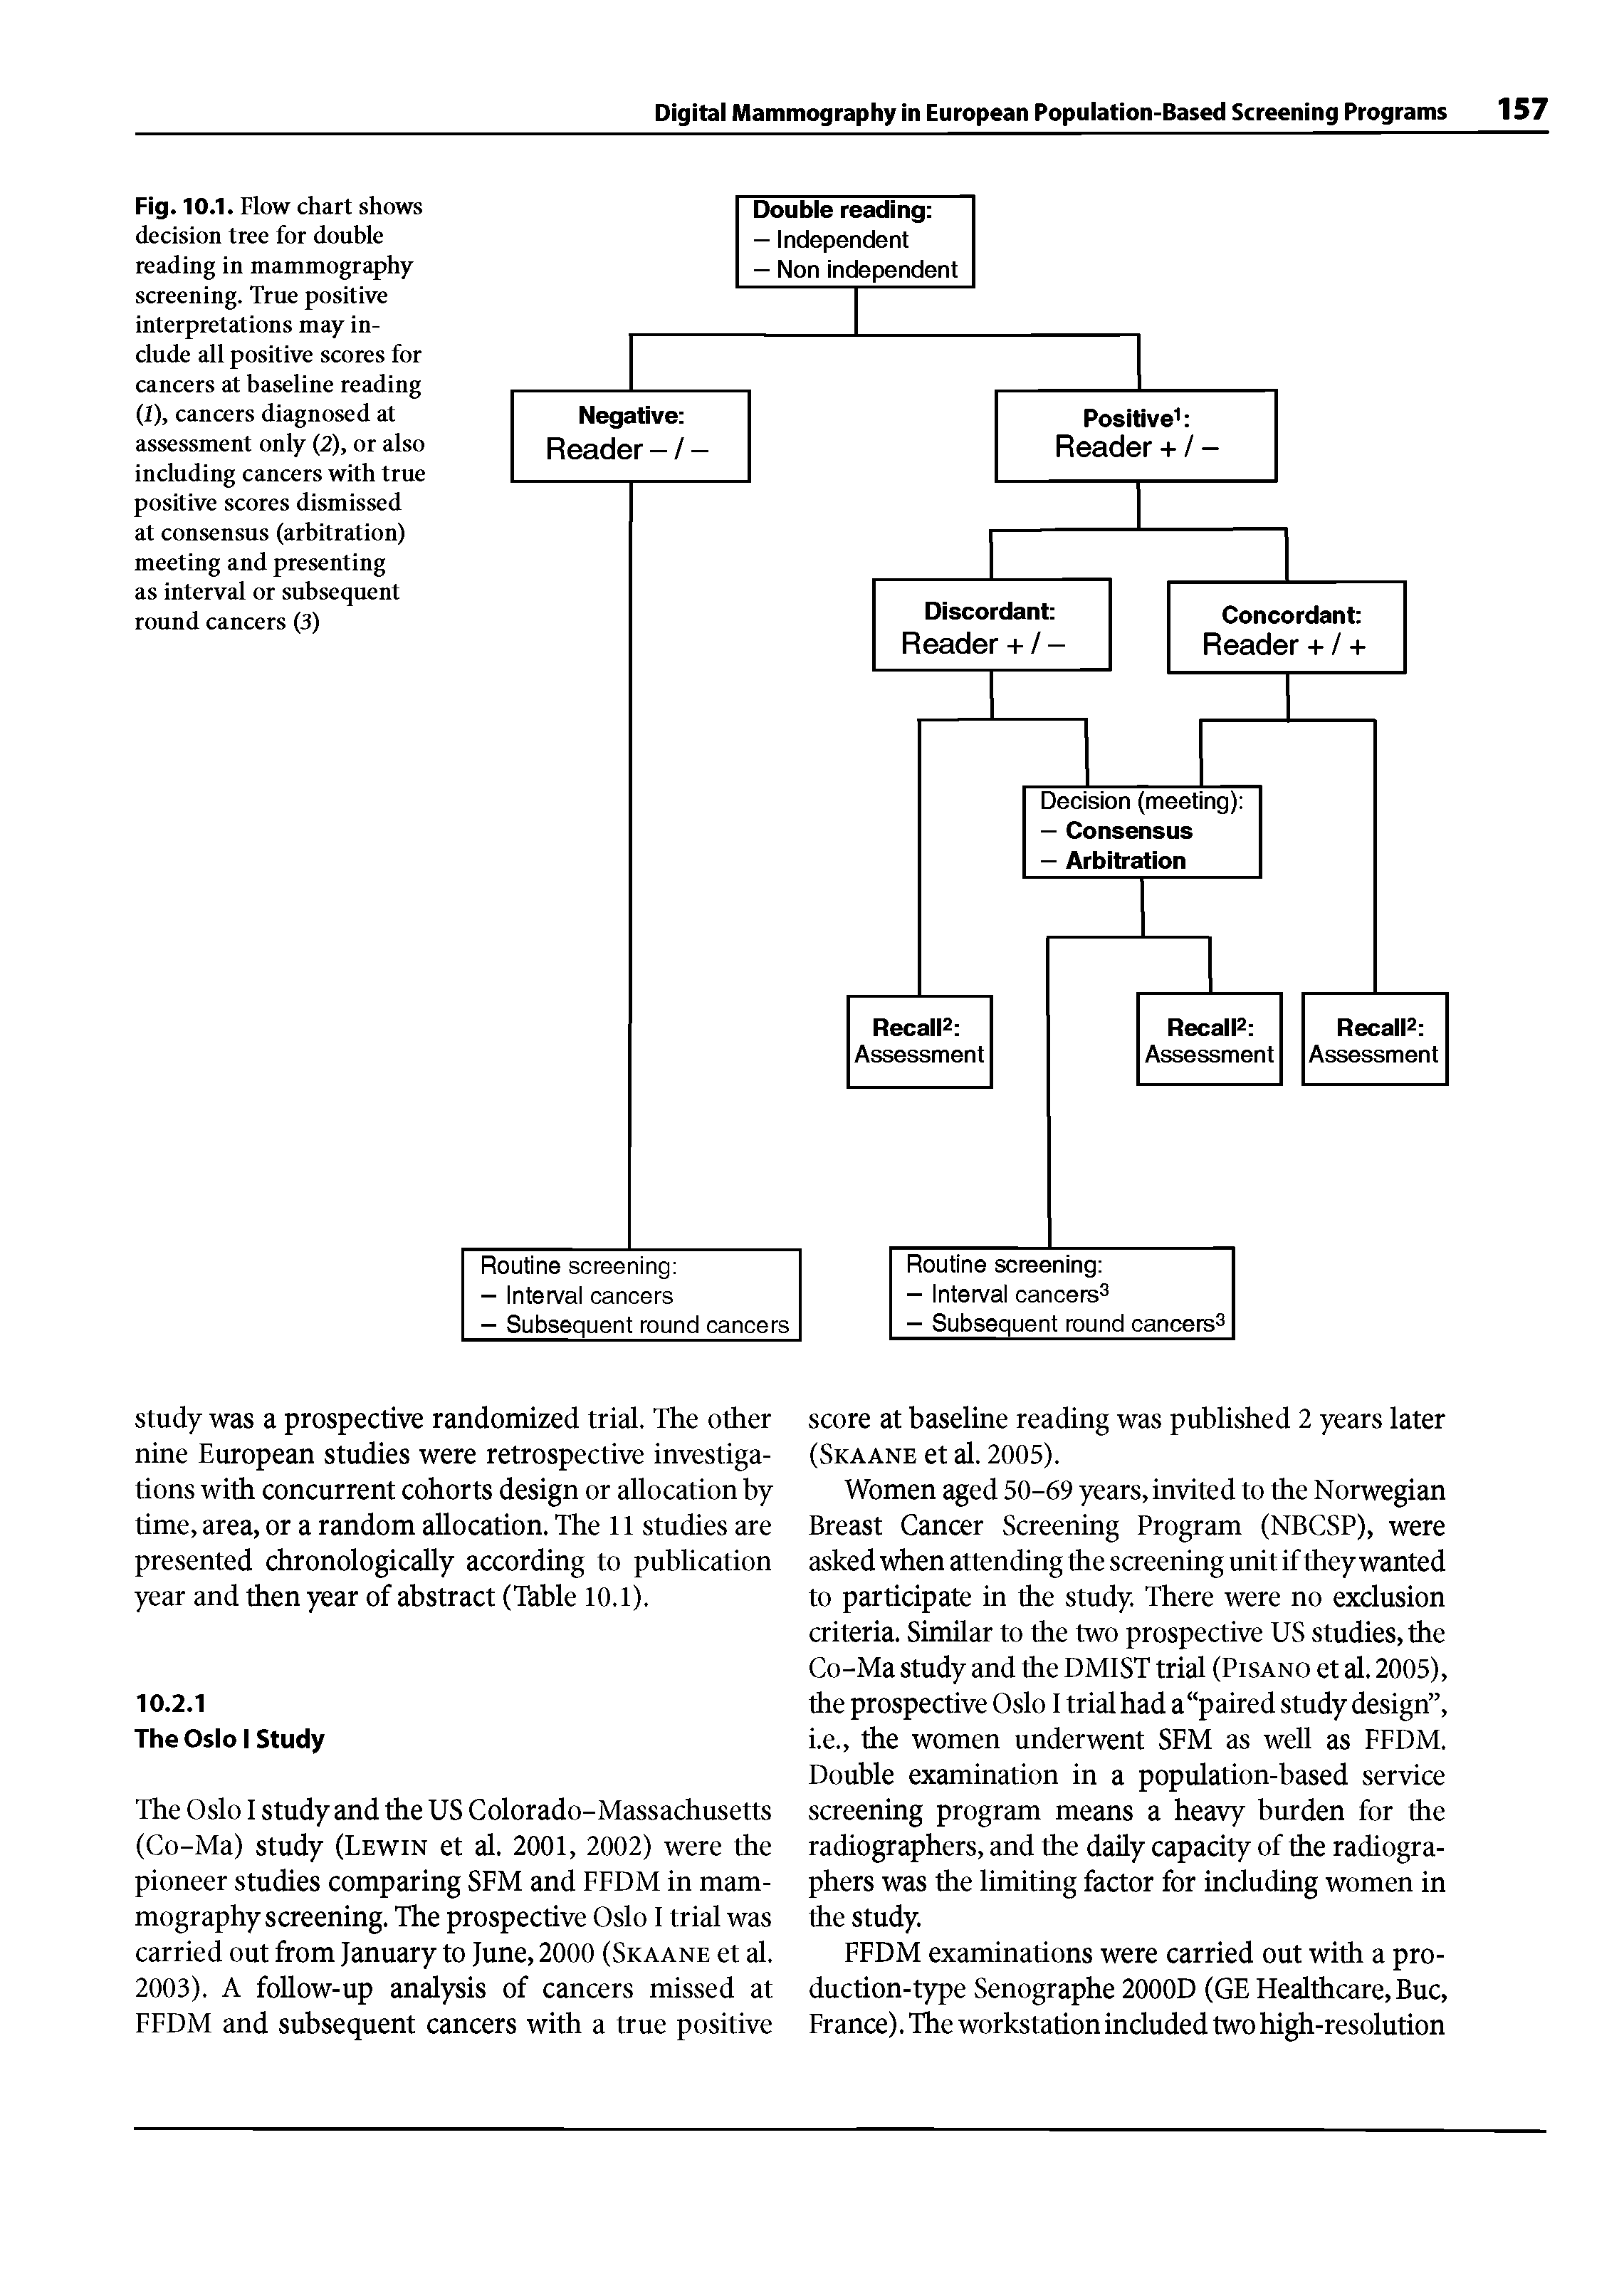 Fig. 10.1. Flow chart shows decision tree for double reading in mammography screening. True positive interpretations may include all positive scores for cancers at baseline reading (1), cancers diagnosed at assessment only (2), or also including cancers with true positive scores dismissed at consensus (arbitration) meeting and presenting as interval or subsequent round cancers (3)...